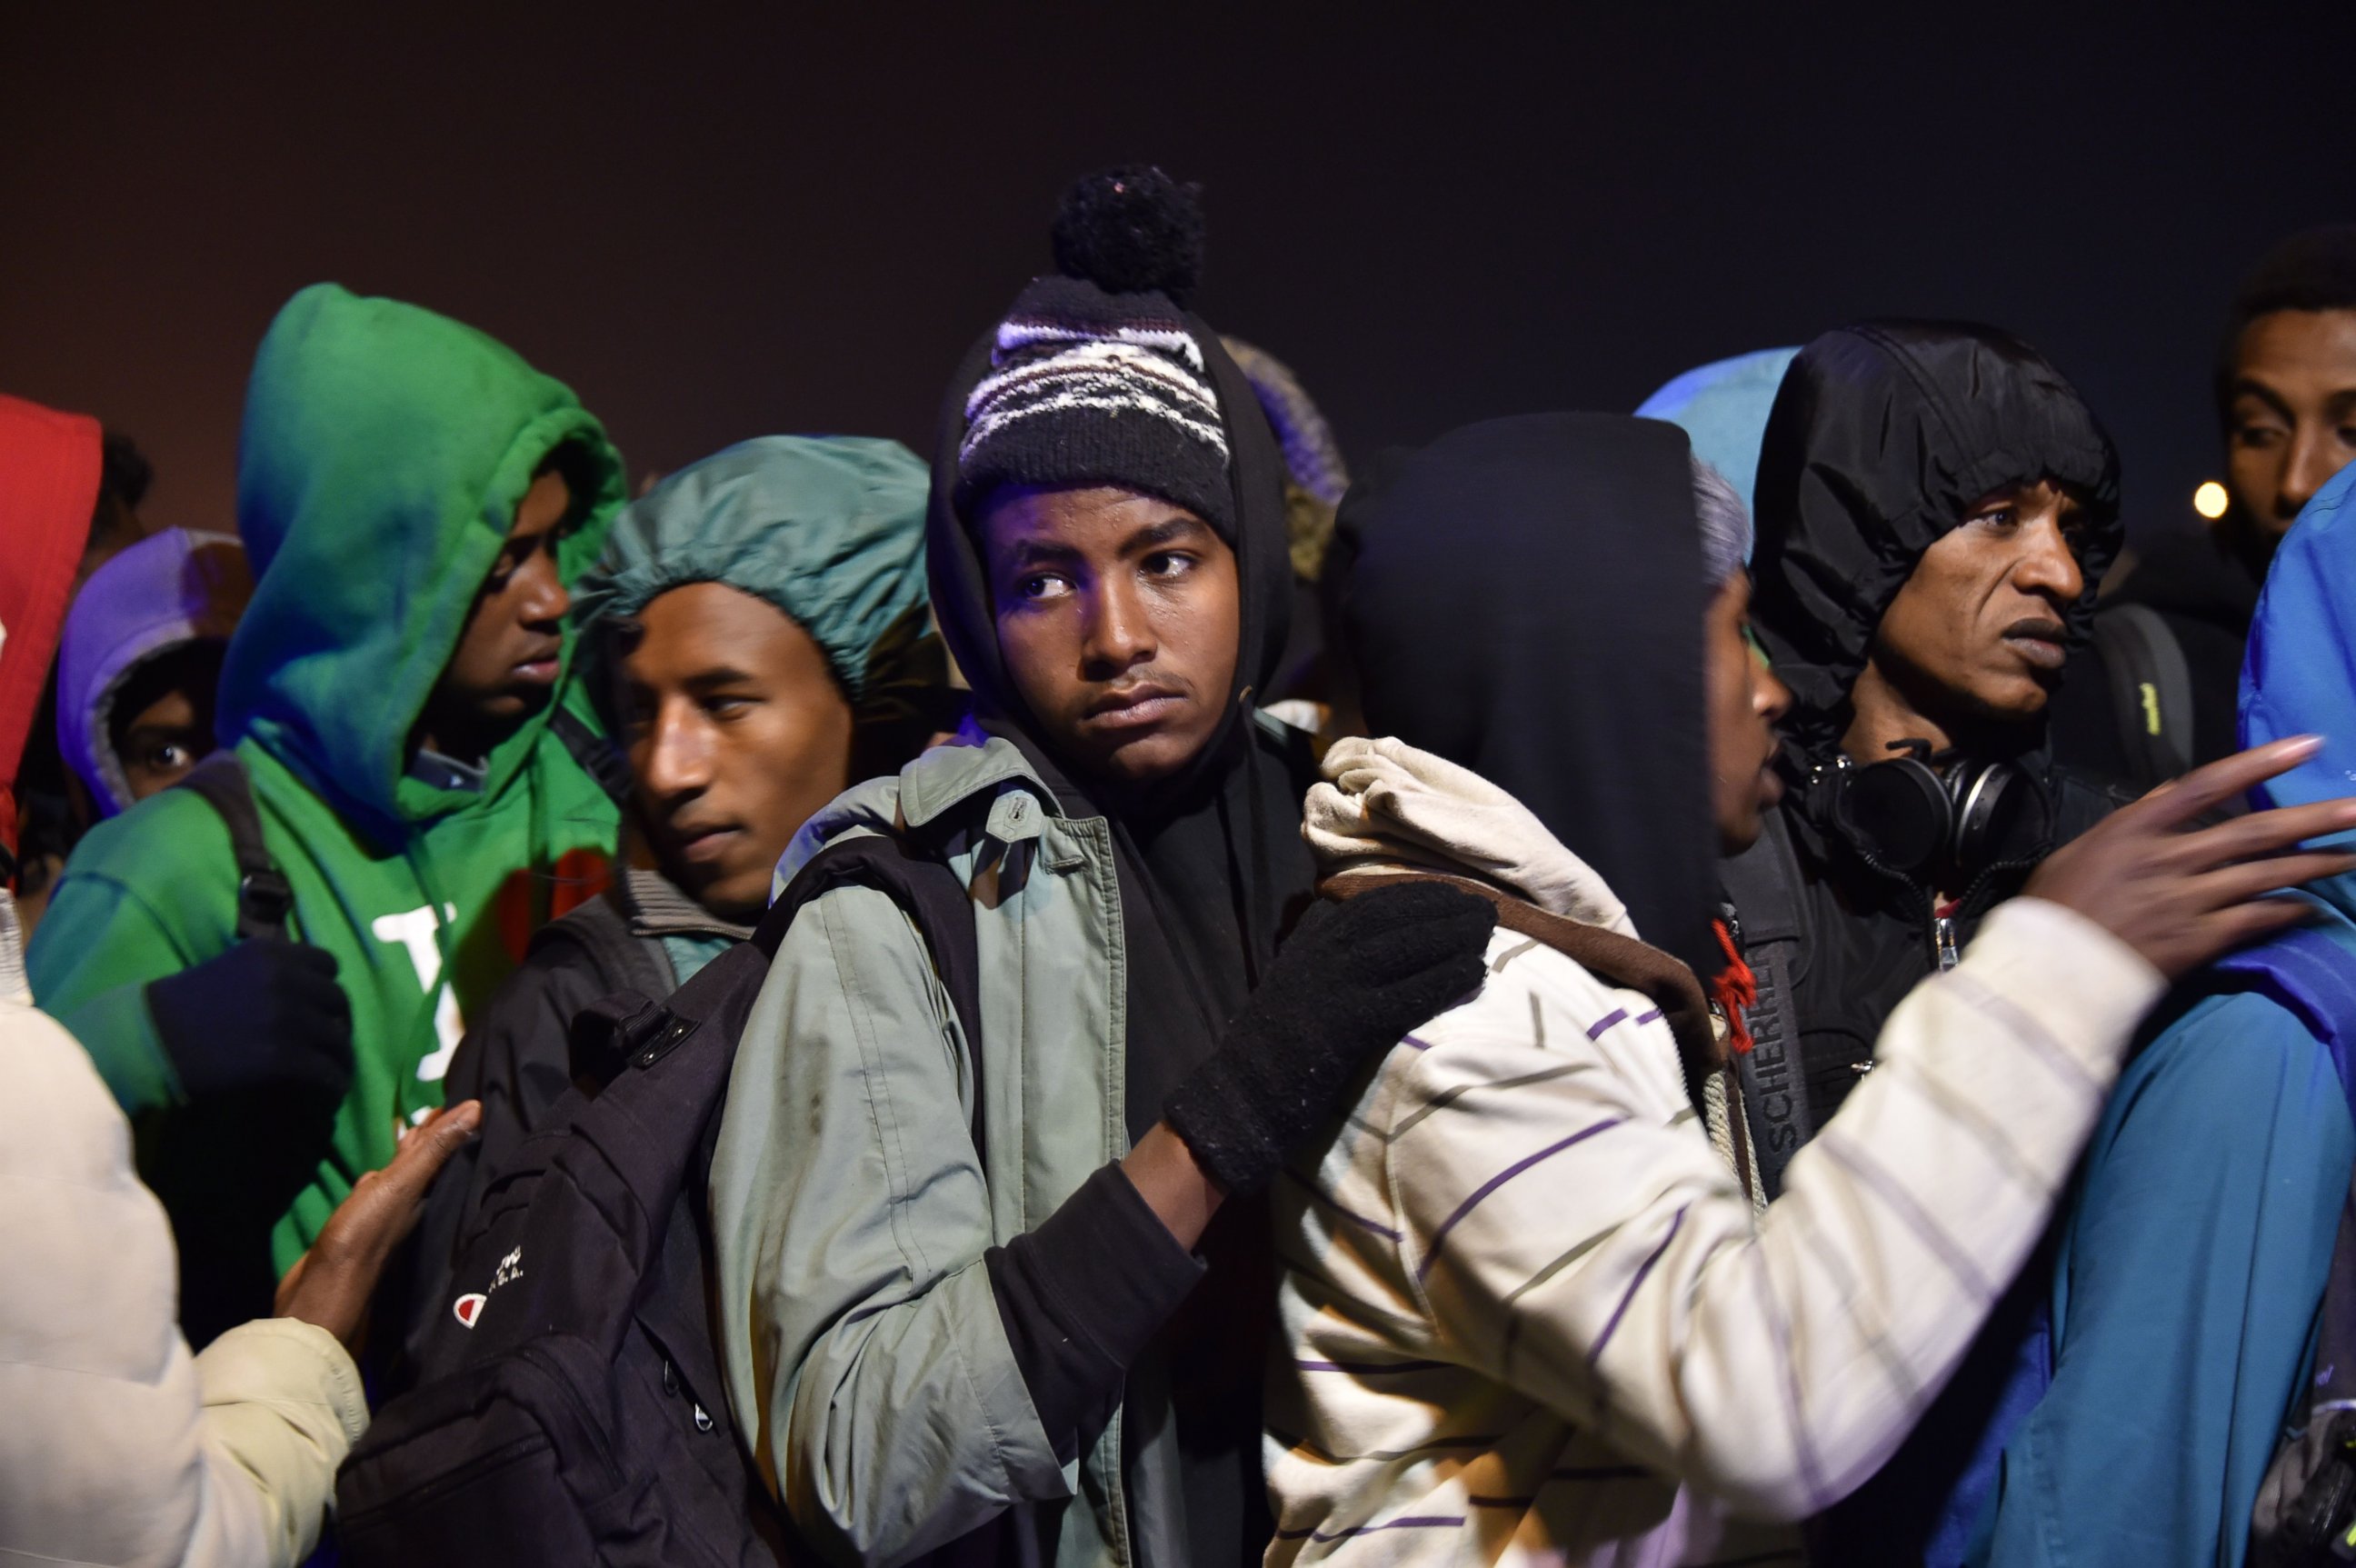 PHOTO: Migrants line up for transportation by bus to reception centers across France, from the "Jungle" migrant camp in Calais, northern France, Oct. 24, 2016.